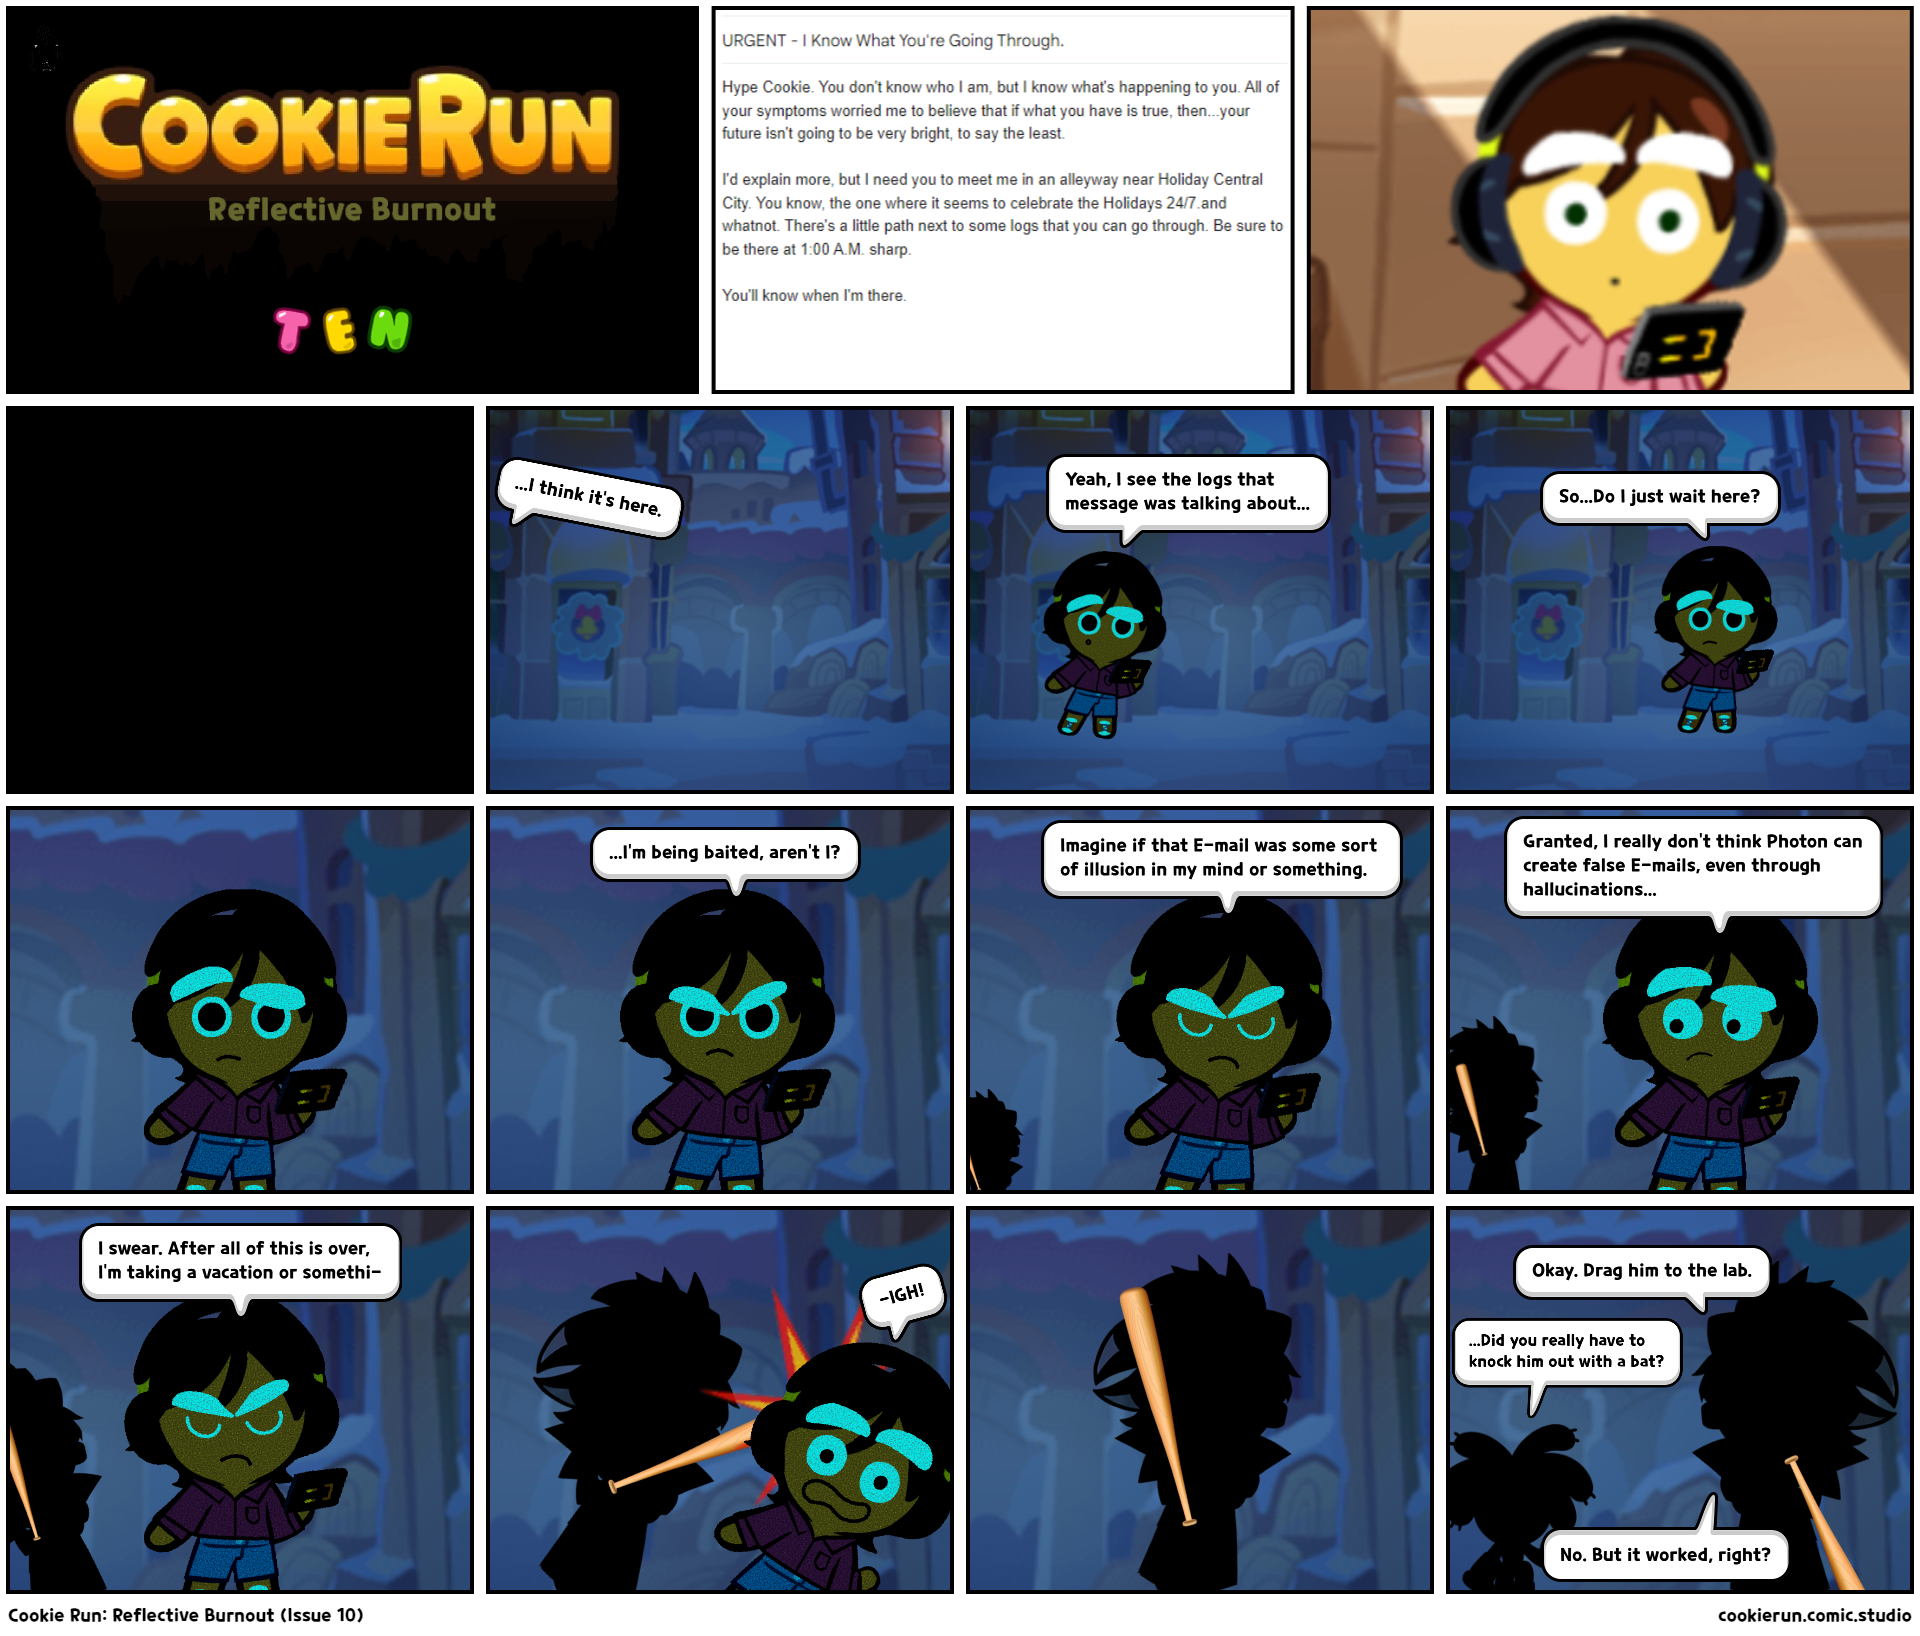 Cookie Run: Reflective Burnout (Issue 10)